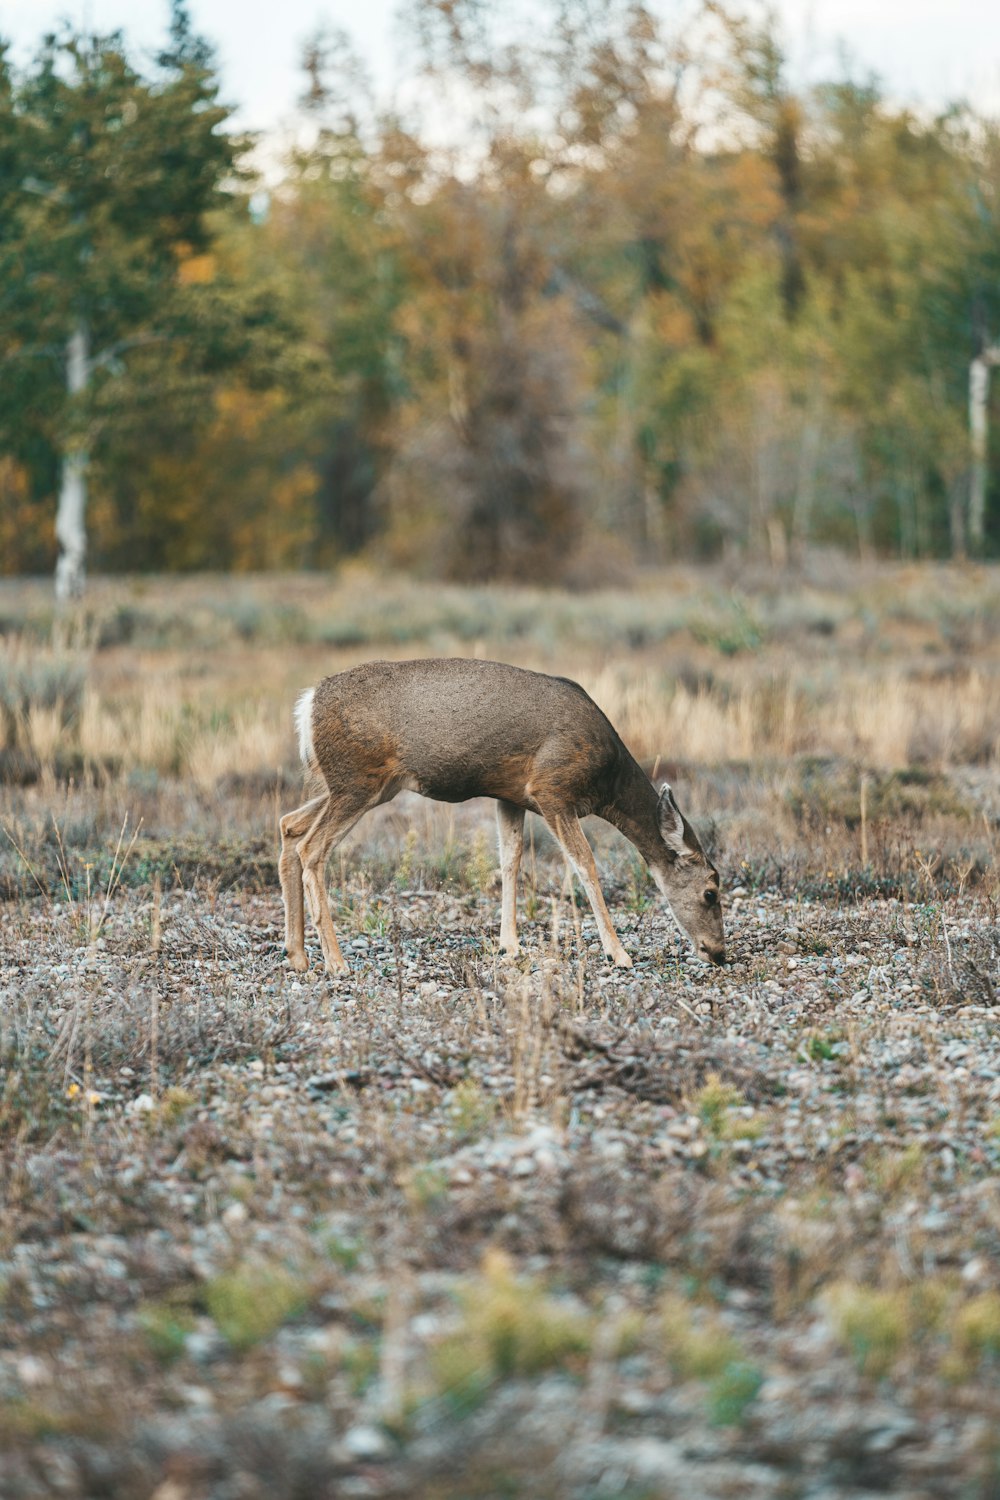 a deer grazing in a field with trees in the background